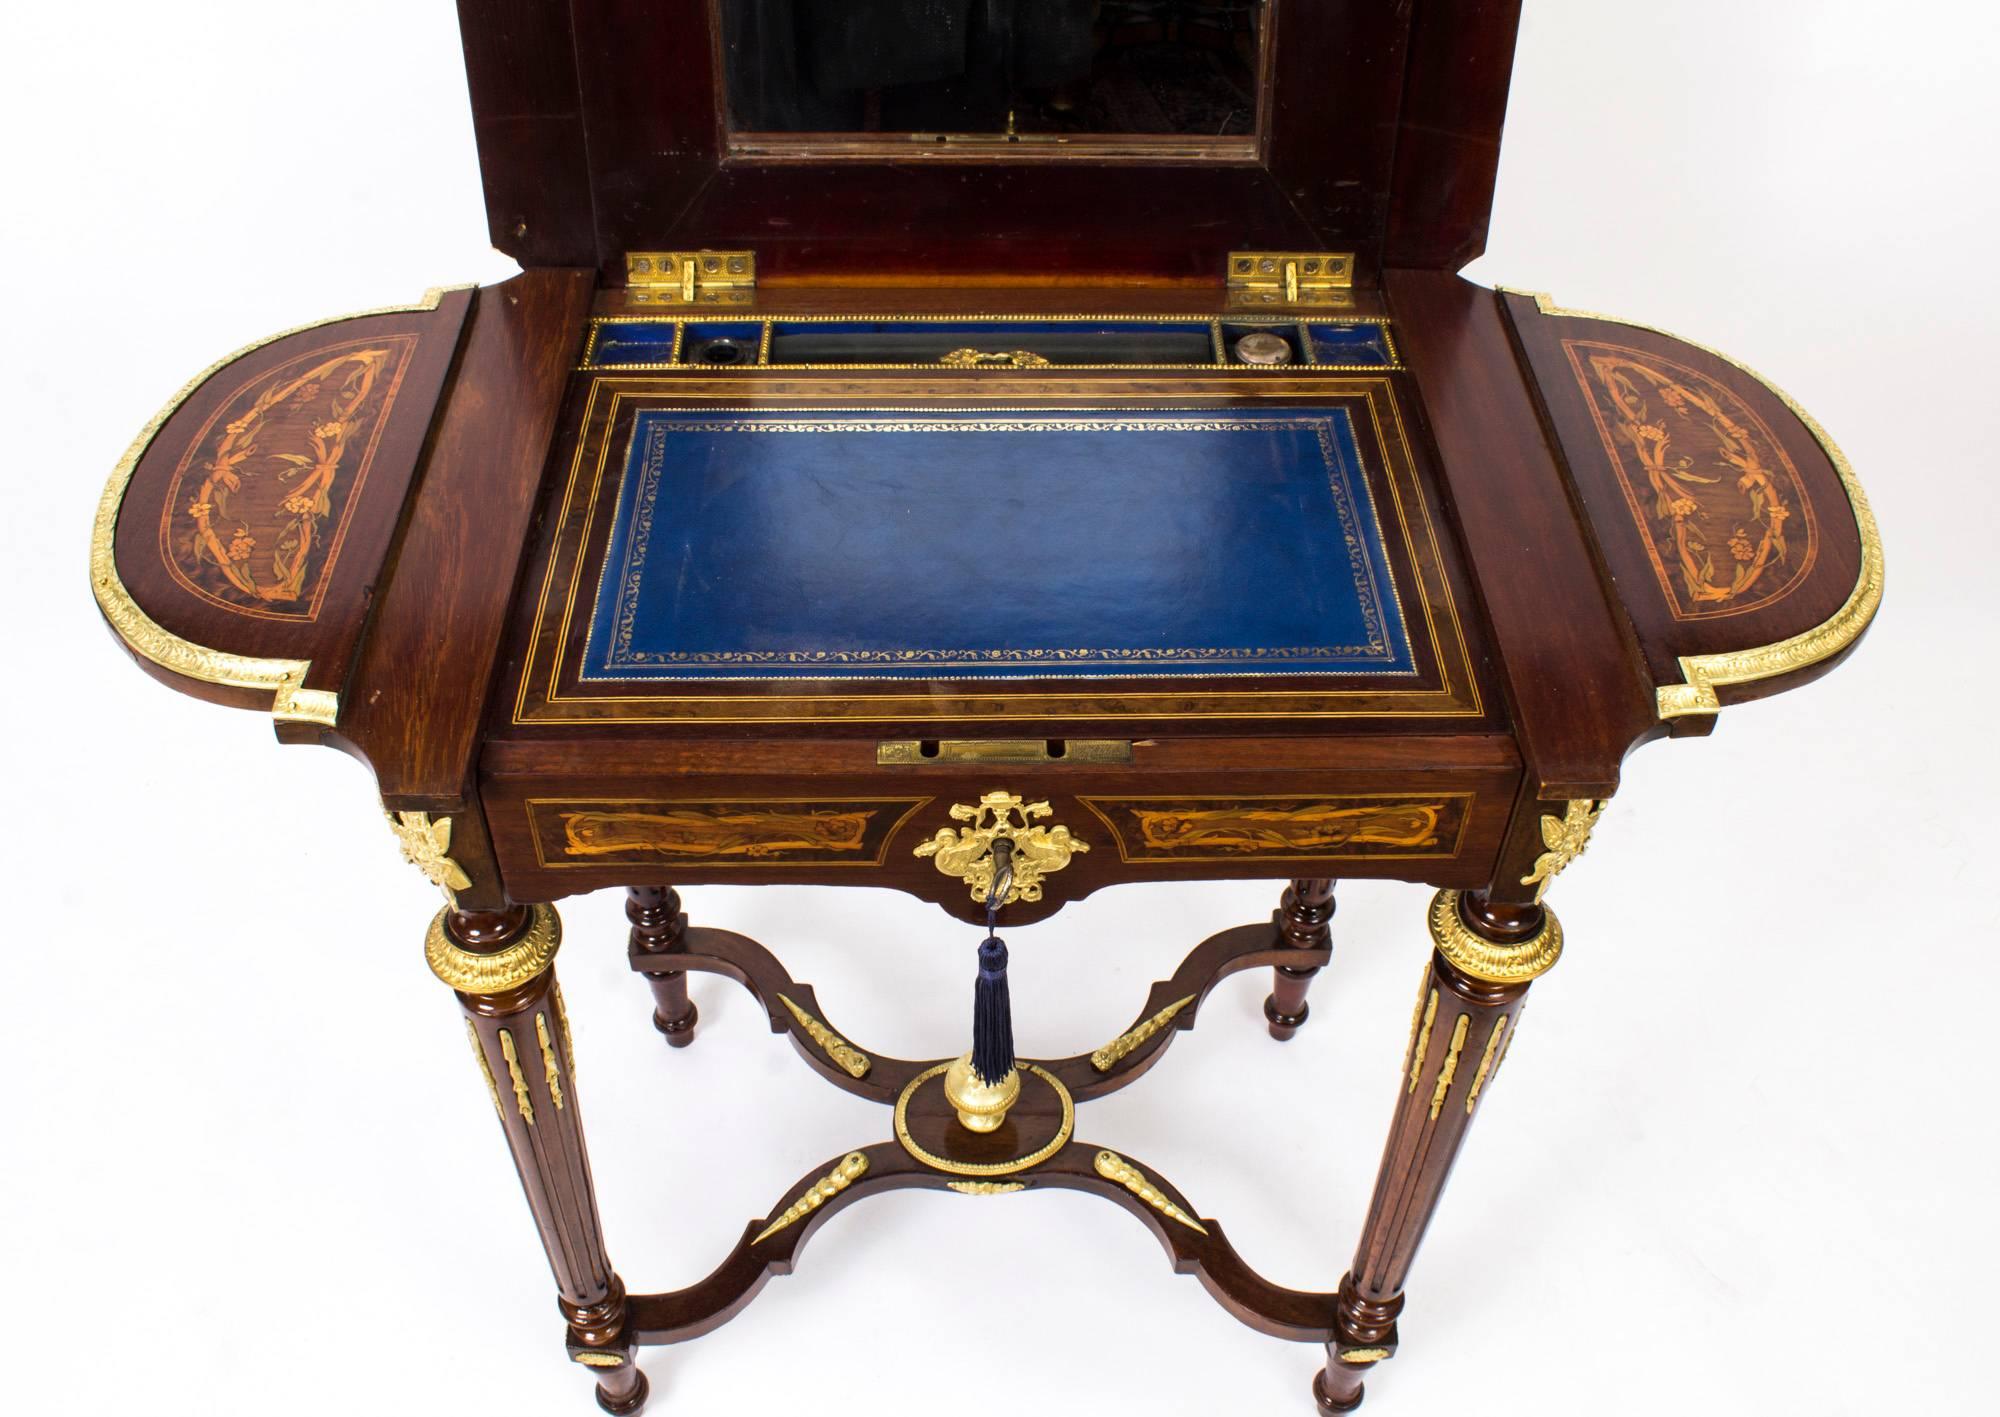 Mid-19th Century Antique French Louis XV Revival Poudreuse Writing Table, circa 1860